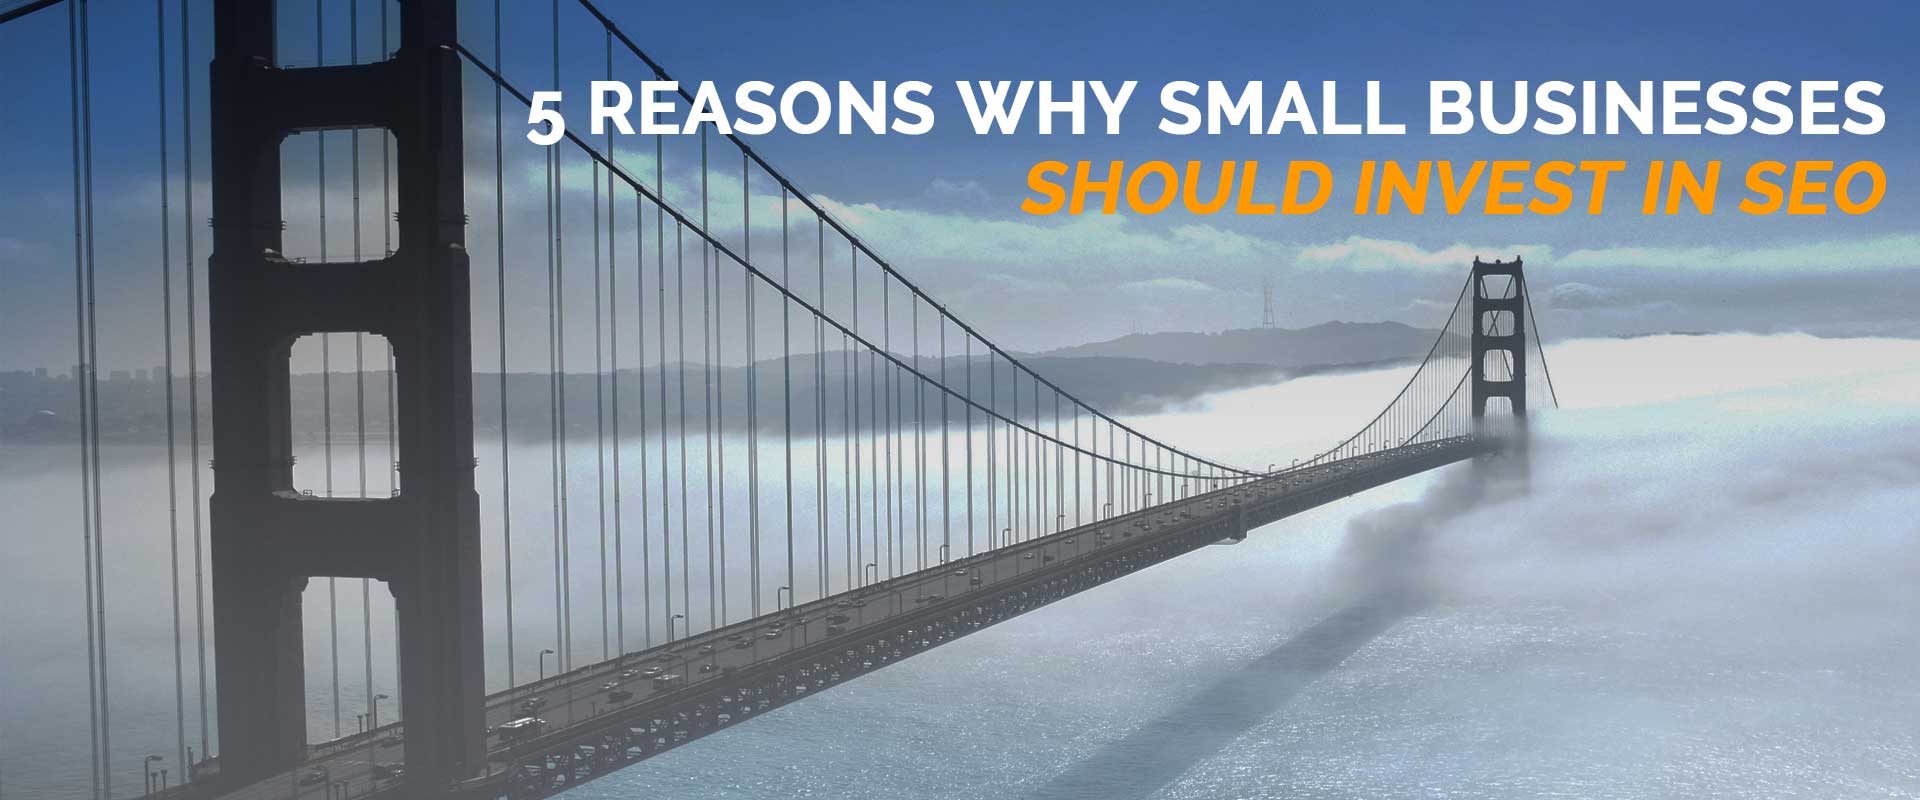 5 Reasons Why Small Businesses Should Invest in SEO